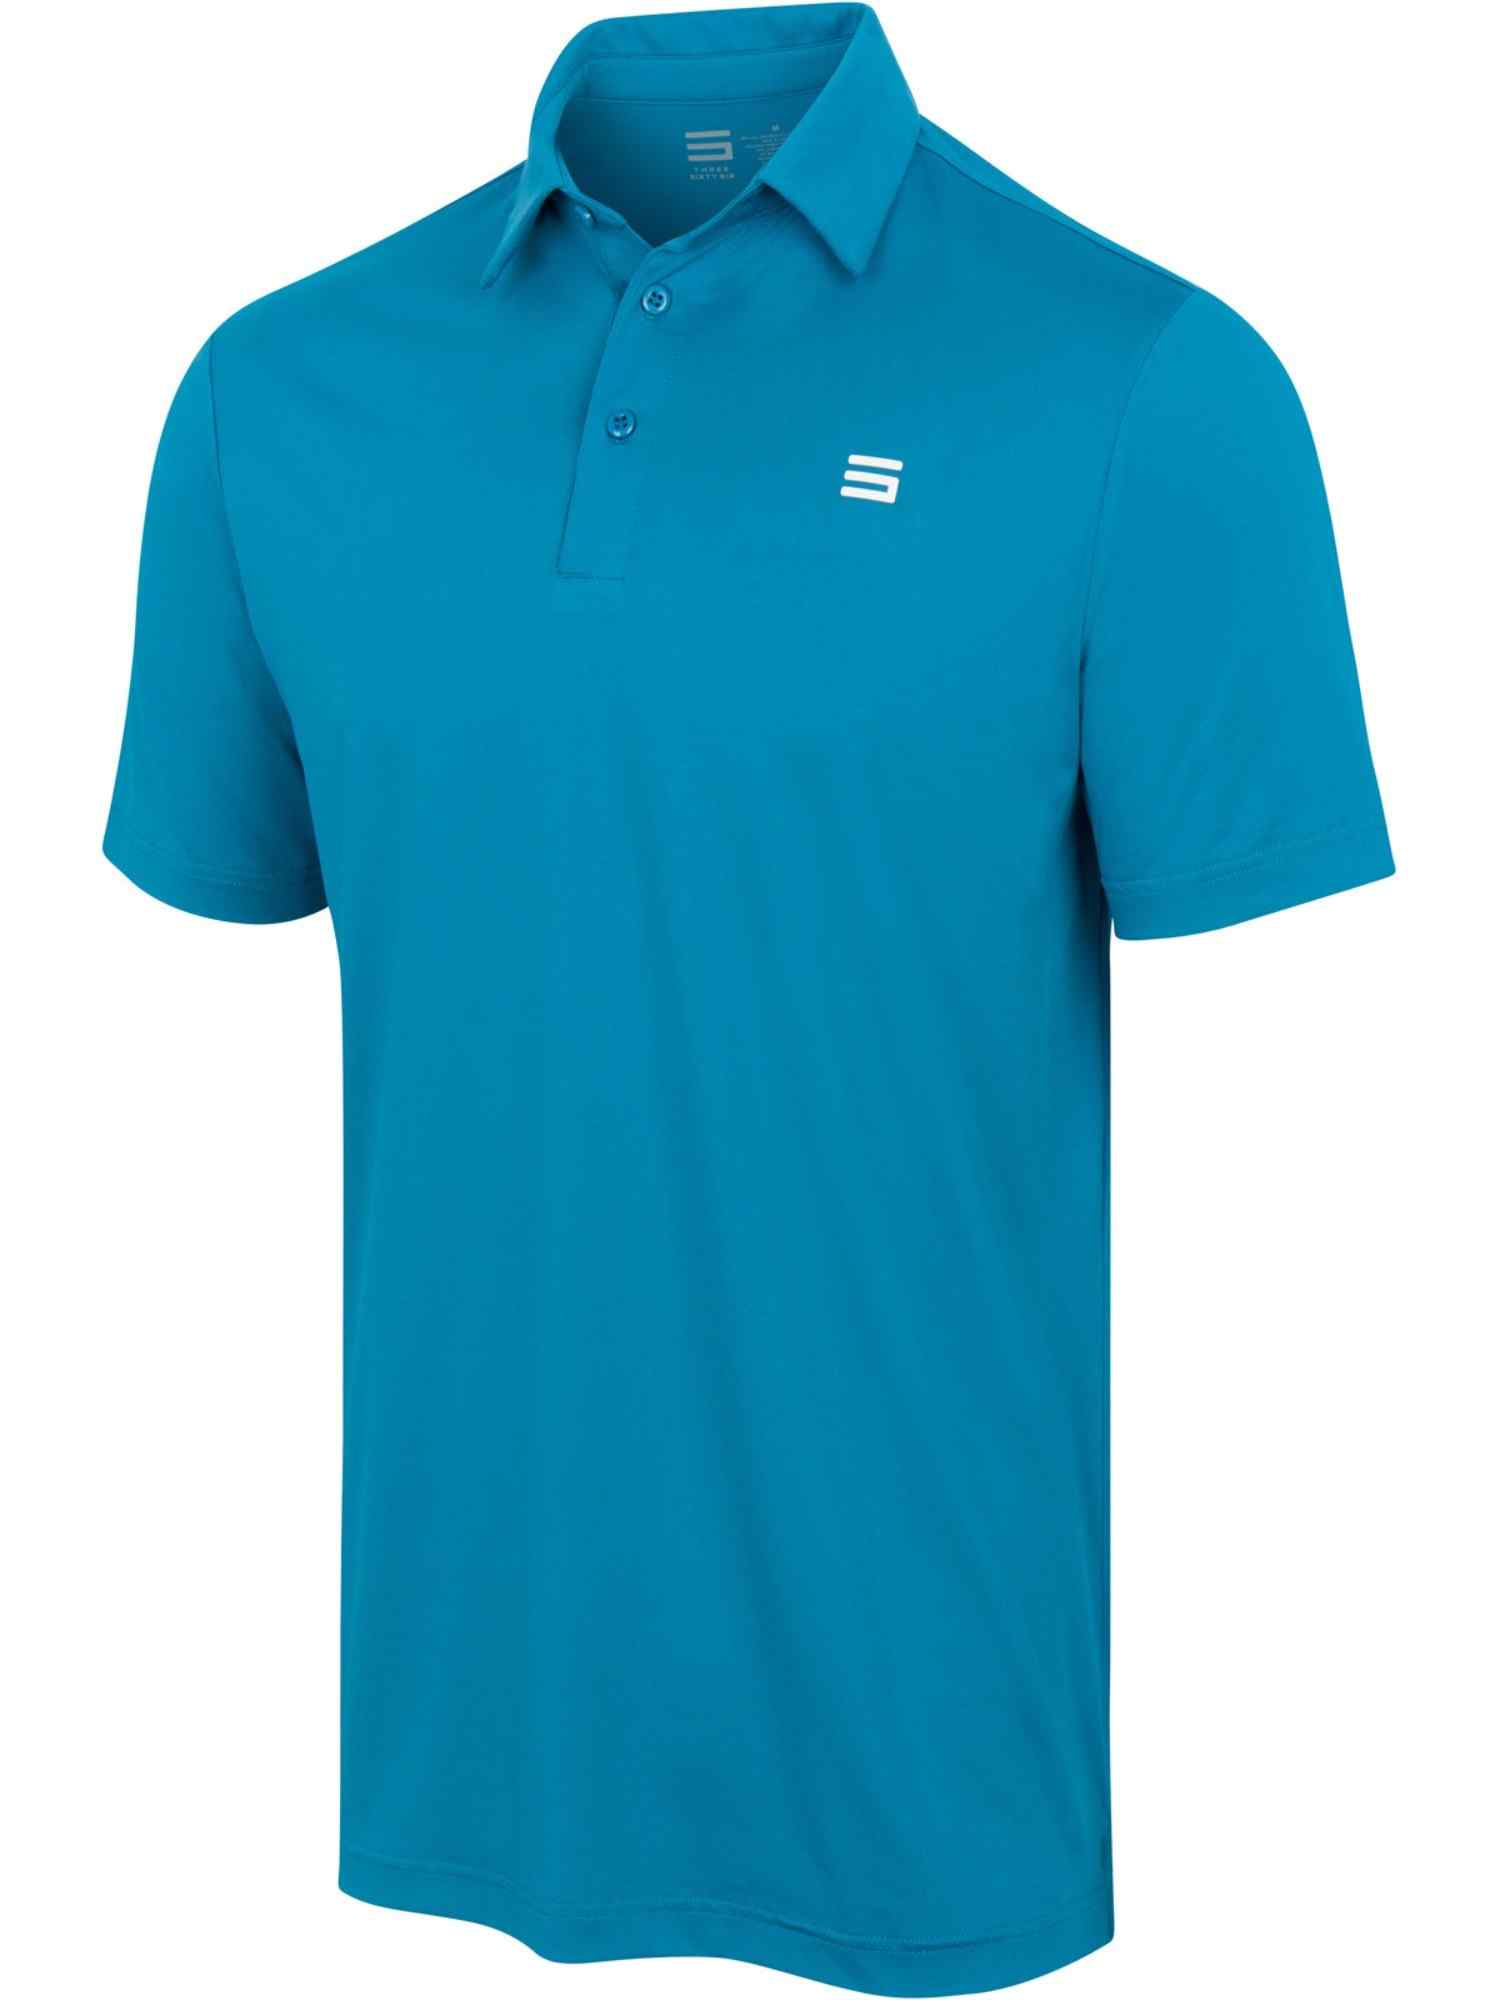 Original TSS Dry-Fit Golf Polo - Additional Colors